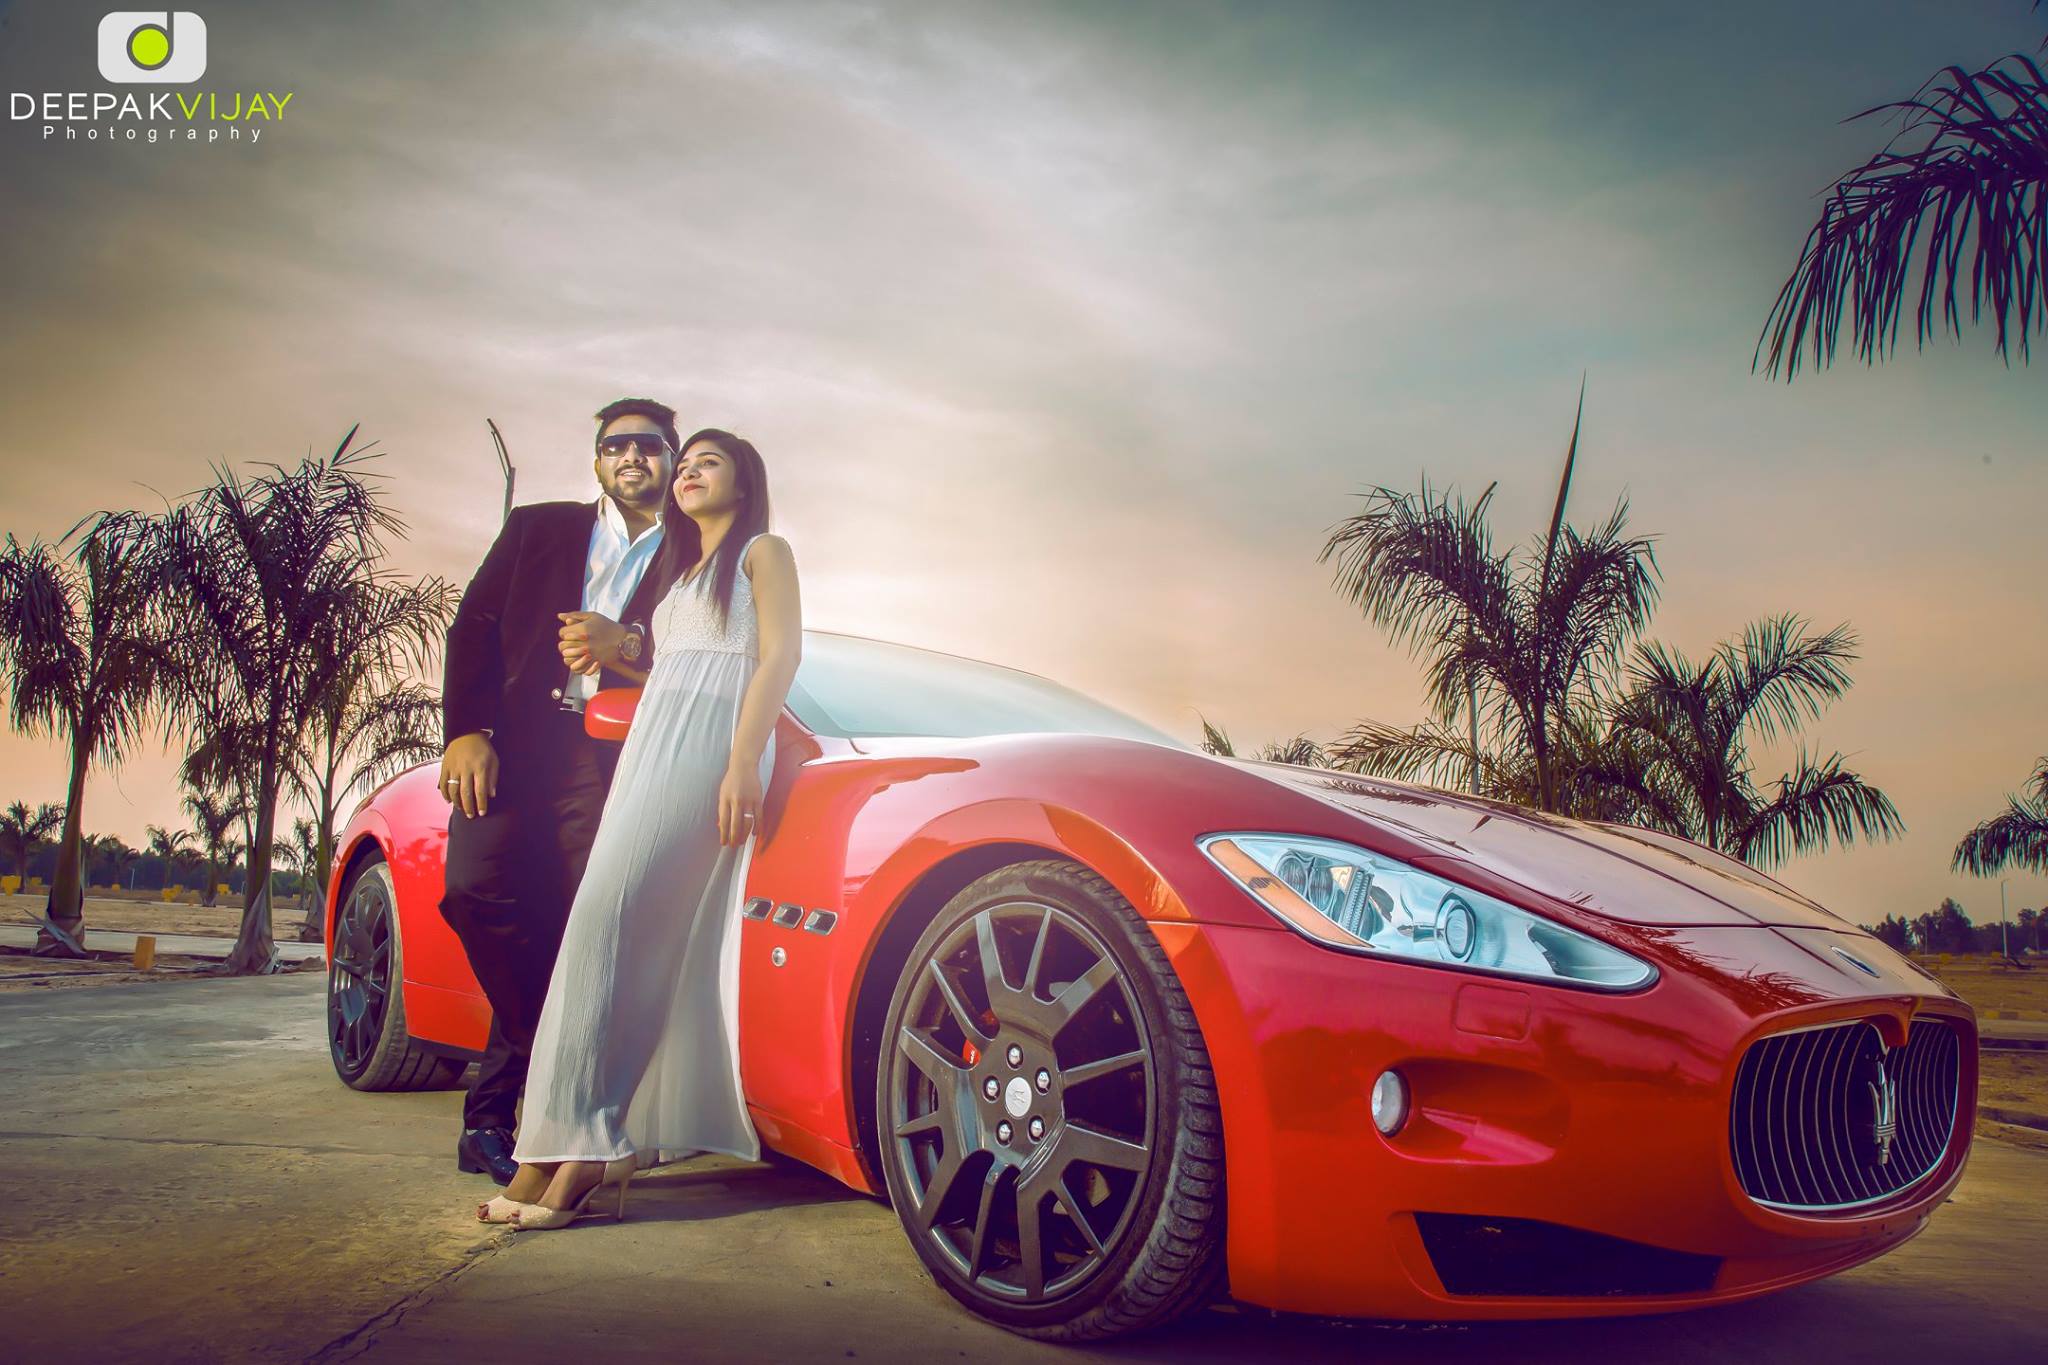 These creative pre wedding photoshoot photos in cars are pin-worthy -